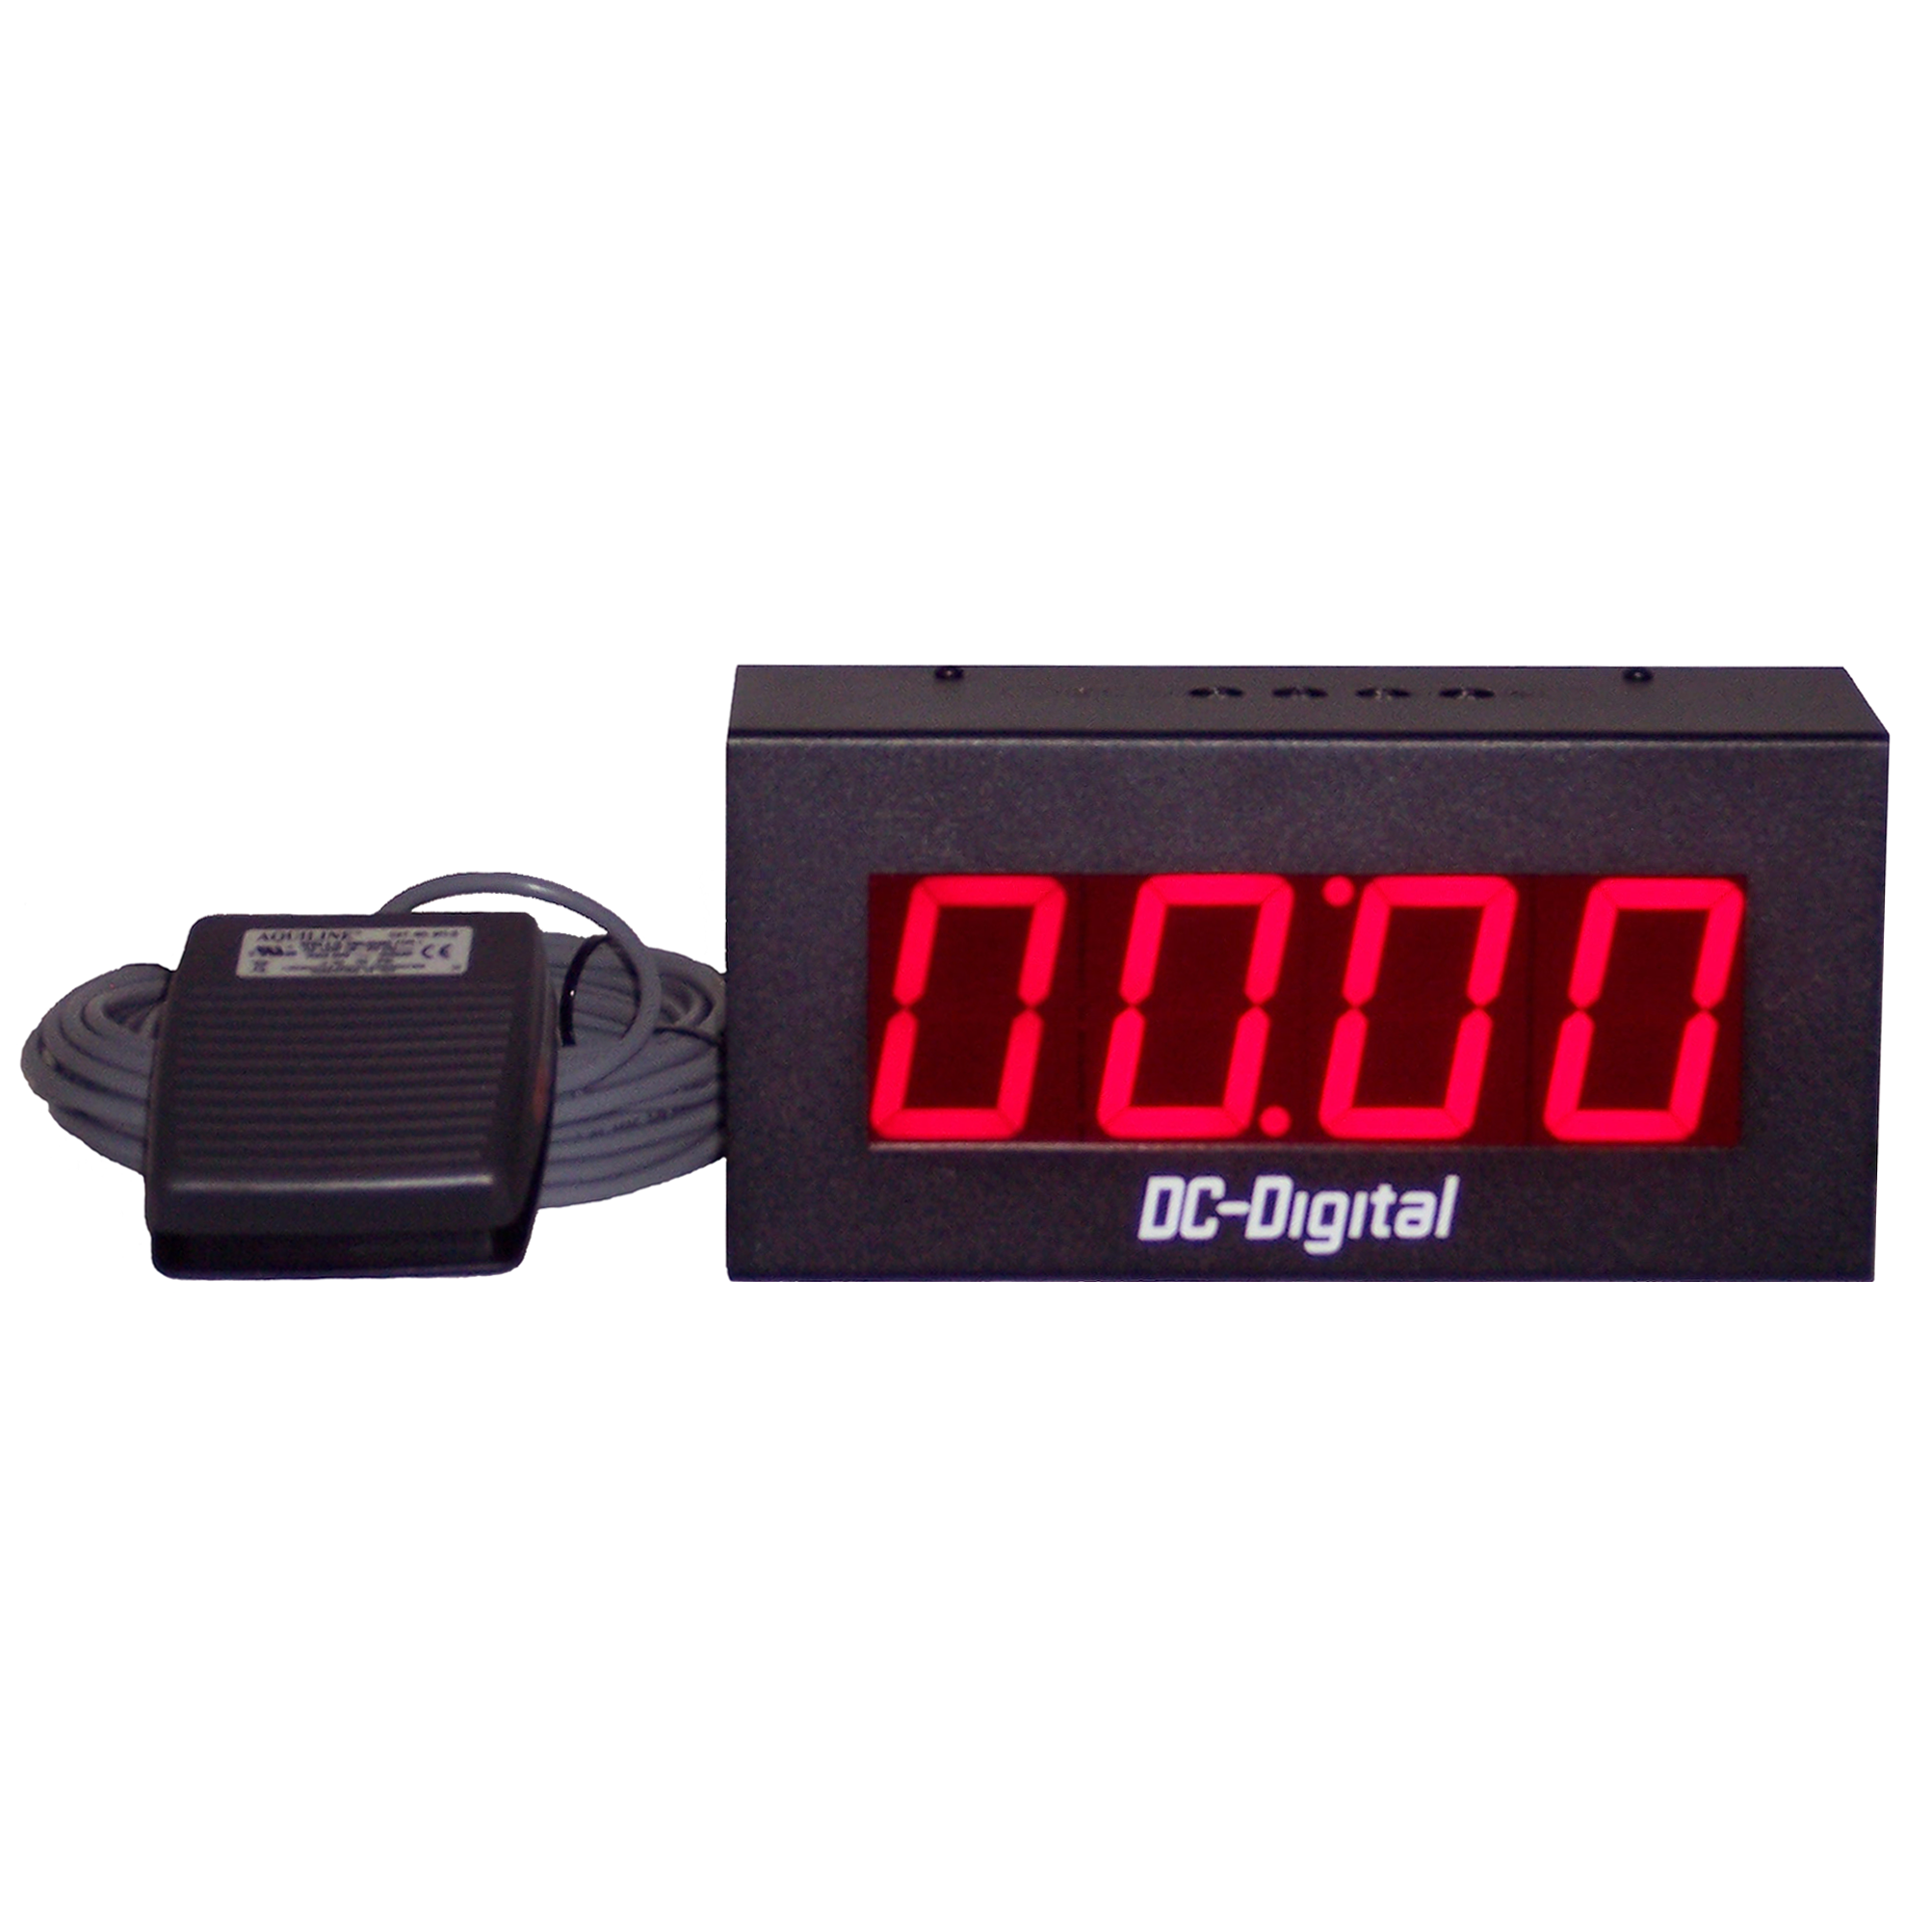 (DC-25T-DN-BCD-FOOT-EOP) 2.3 Inch LED, BCD Rotary Switch Set, Foot-Switch Controlled, Digital Countdown Process Timer with EOP Buzzer